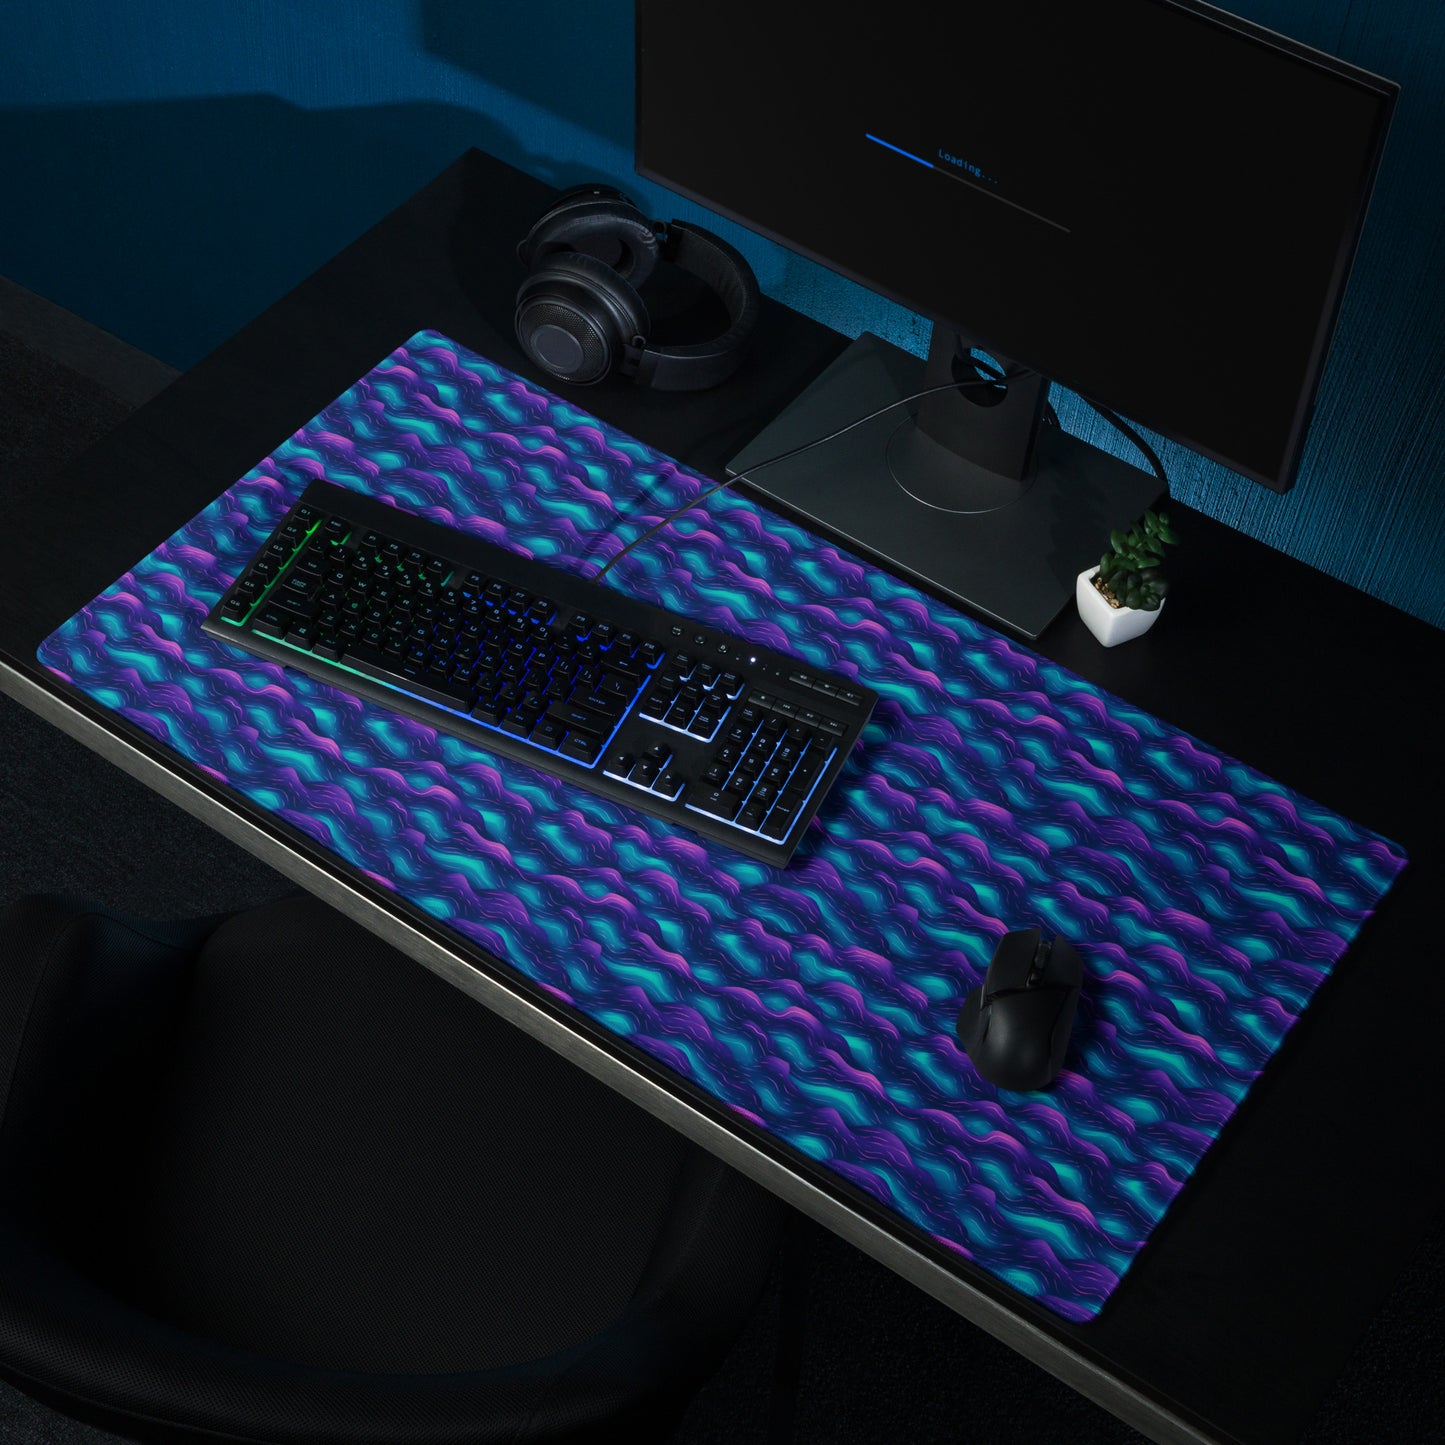 A 36" x 18" desk pad with blue and purple wave pattern sitting on a desk.